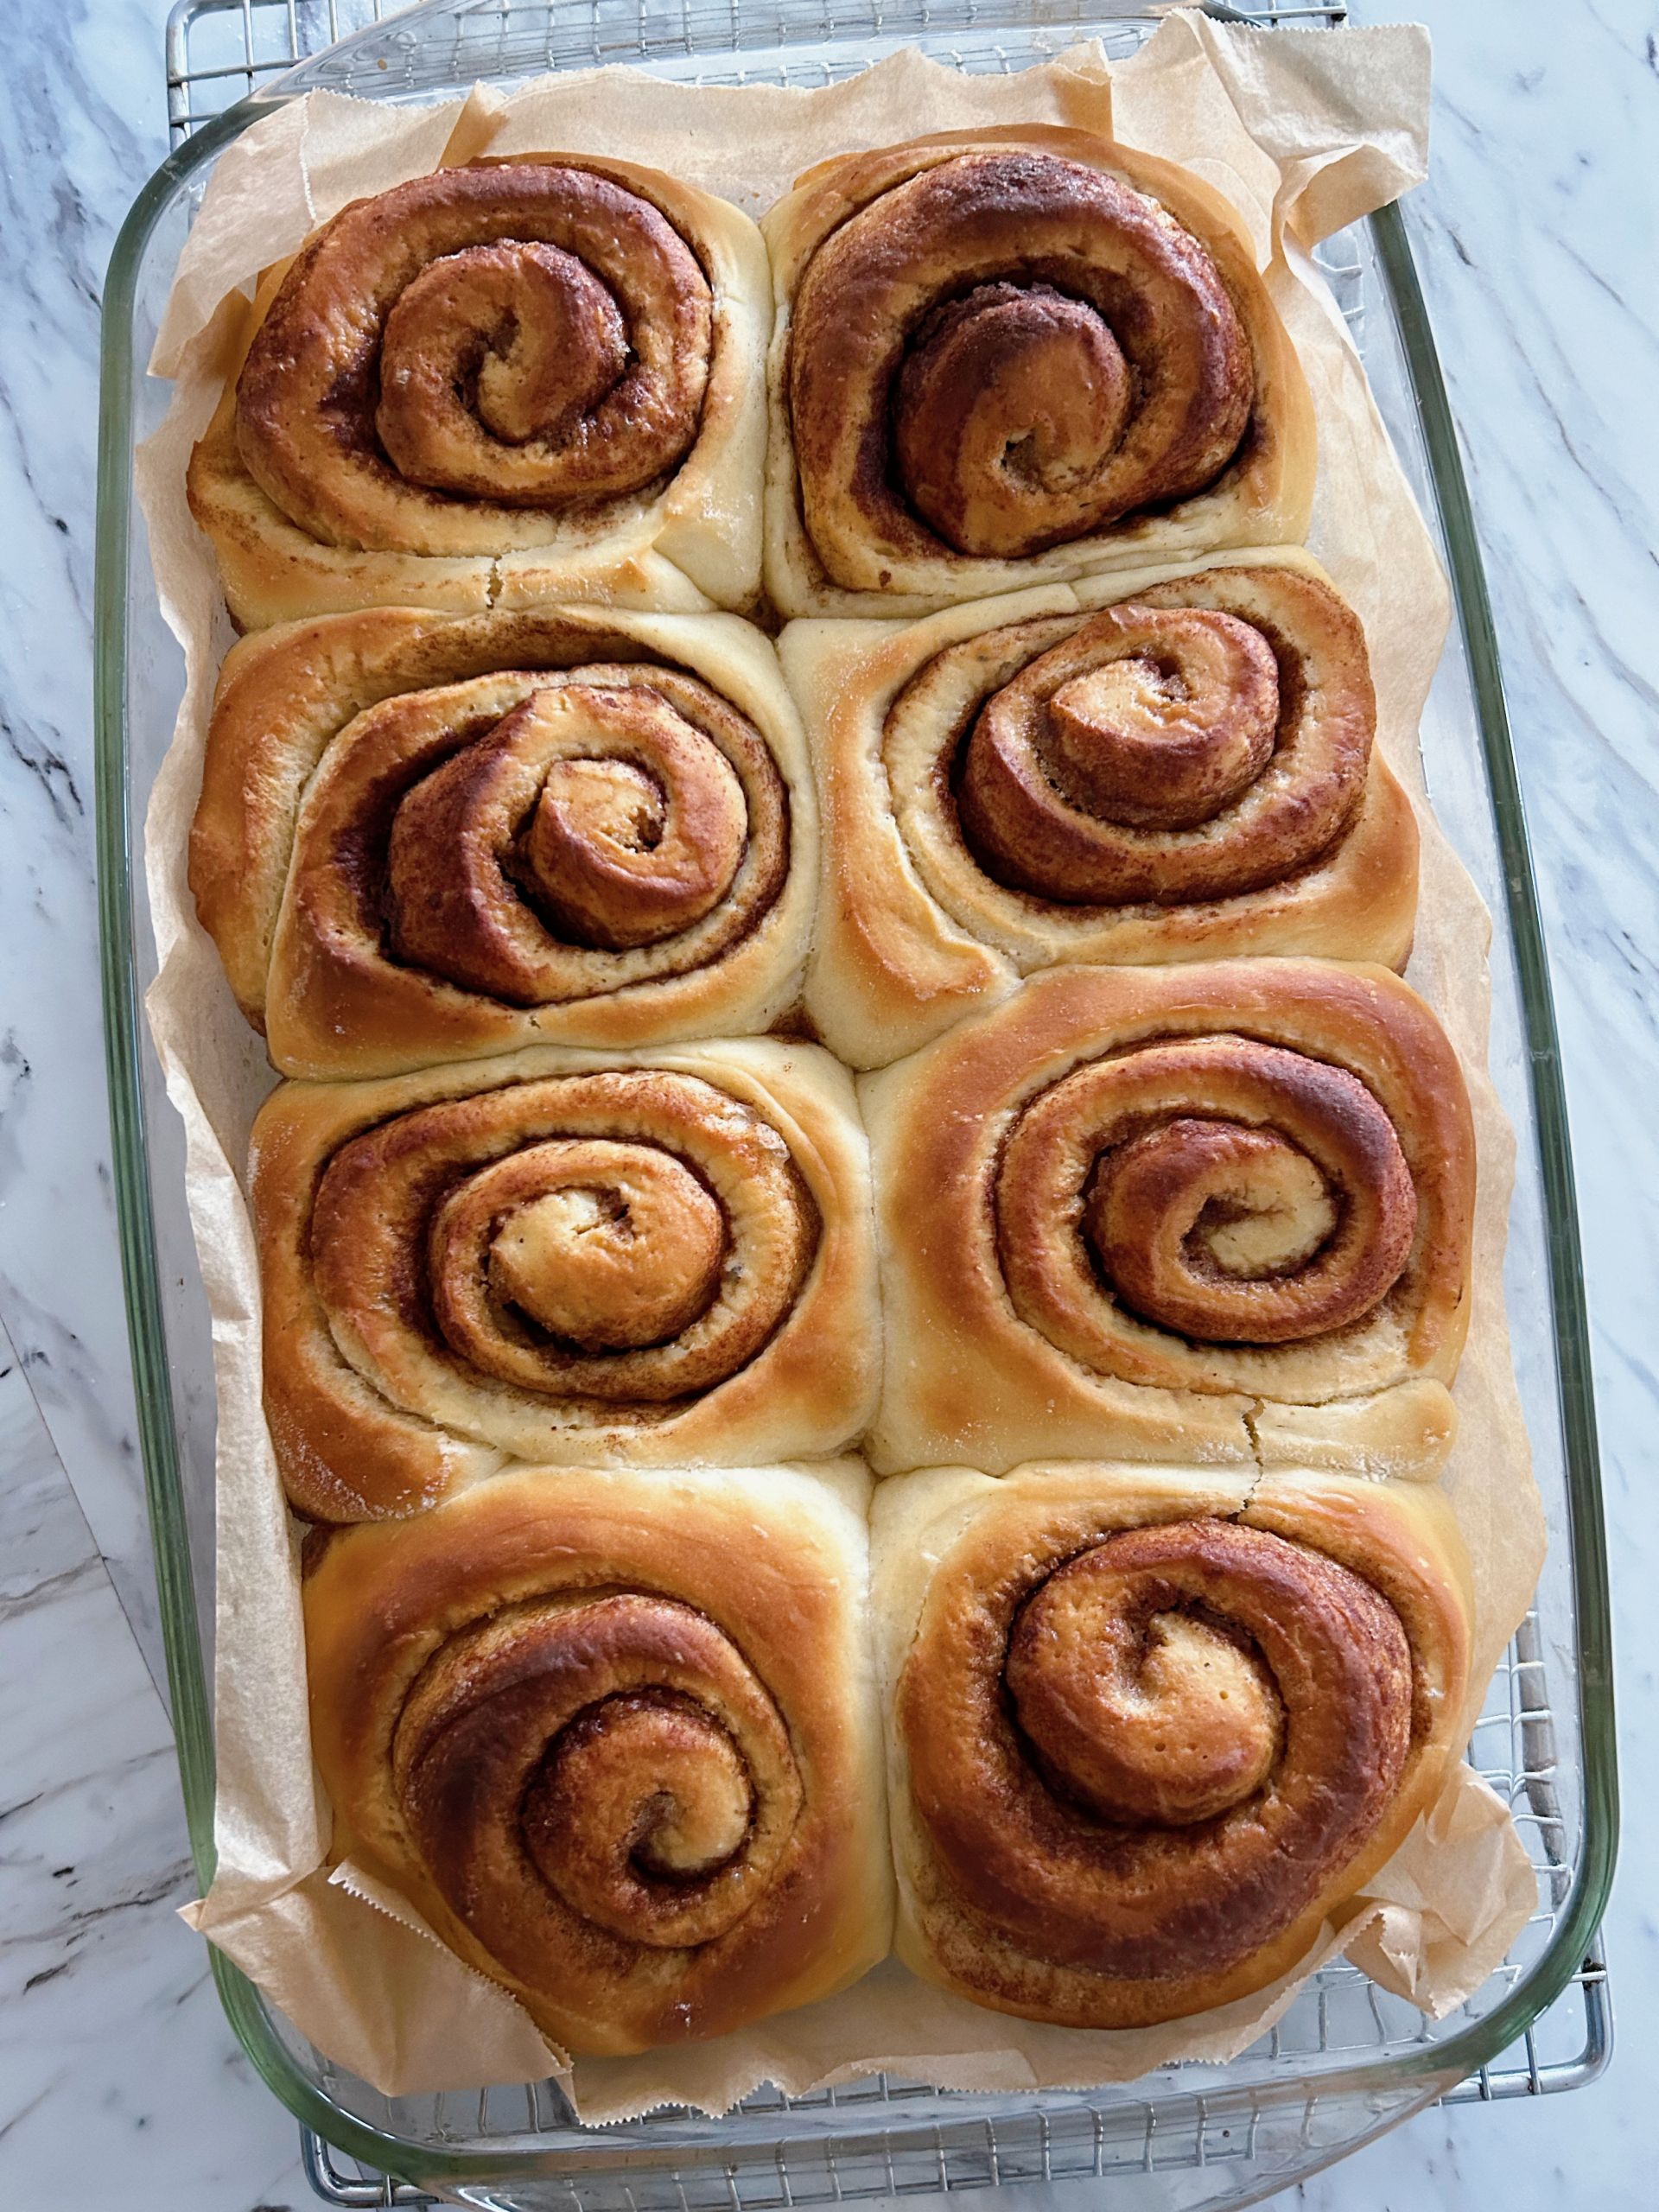 Eight large fluffy sourdough discard cinnamon buns cooling in a large baking dish.